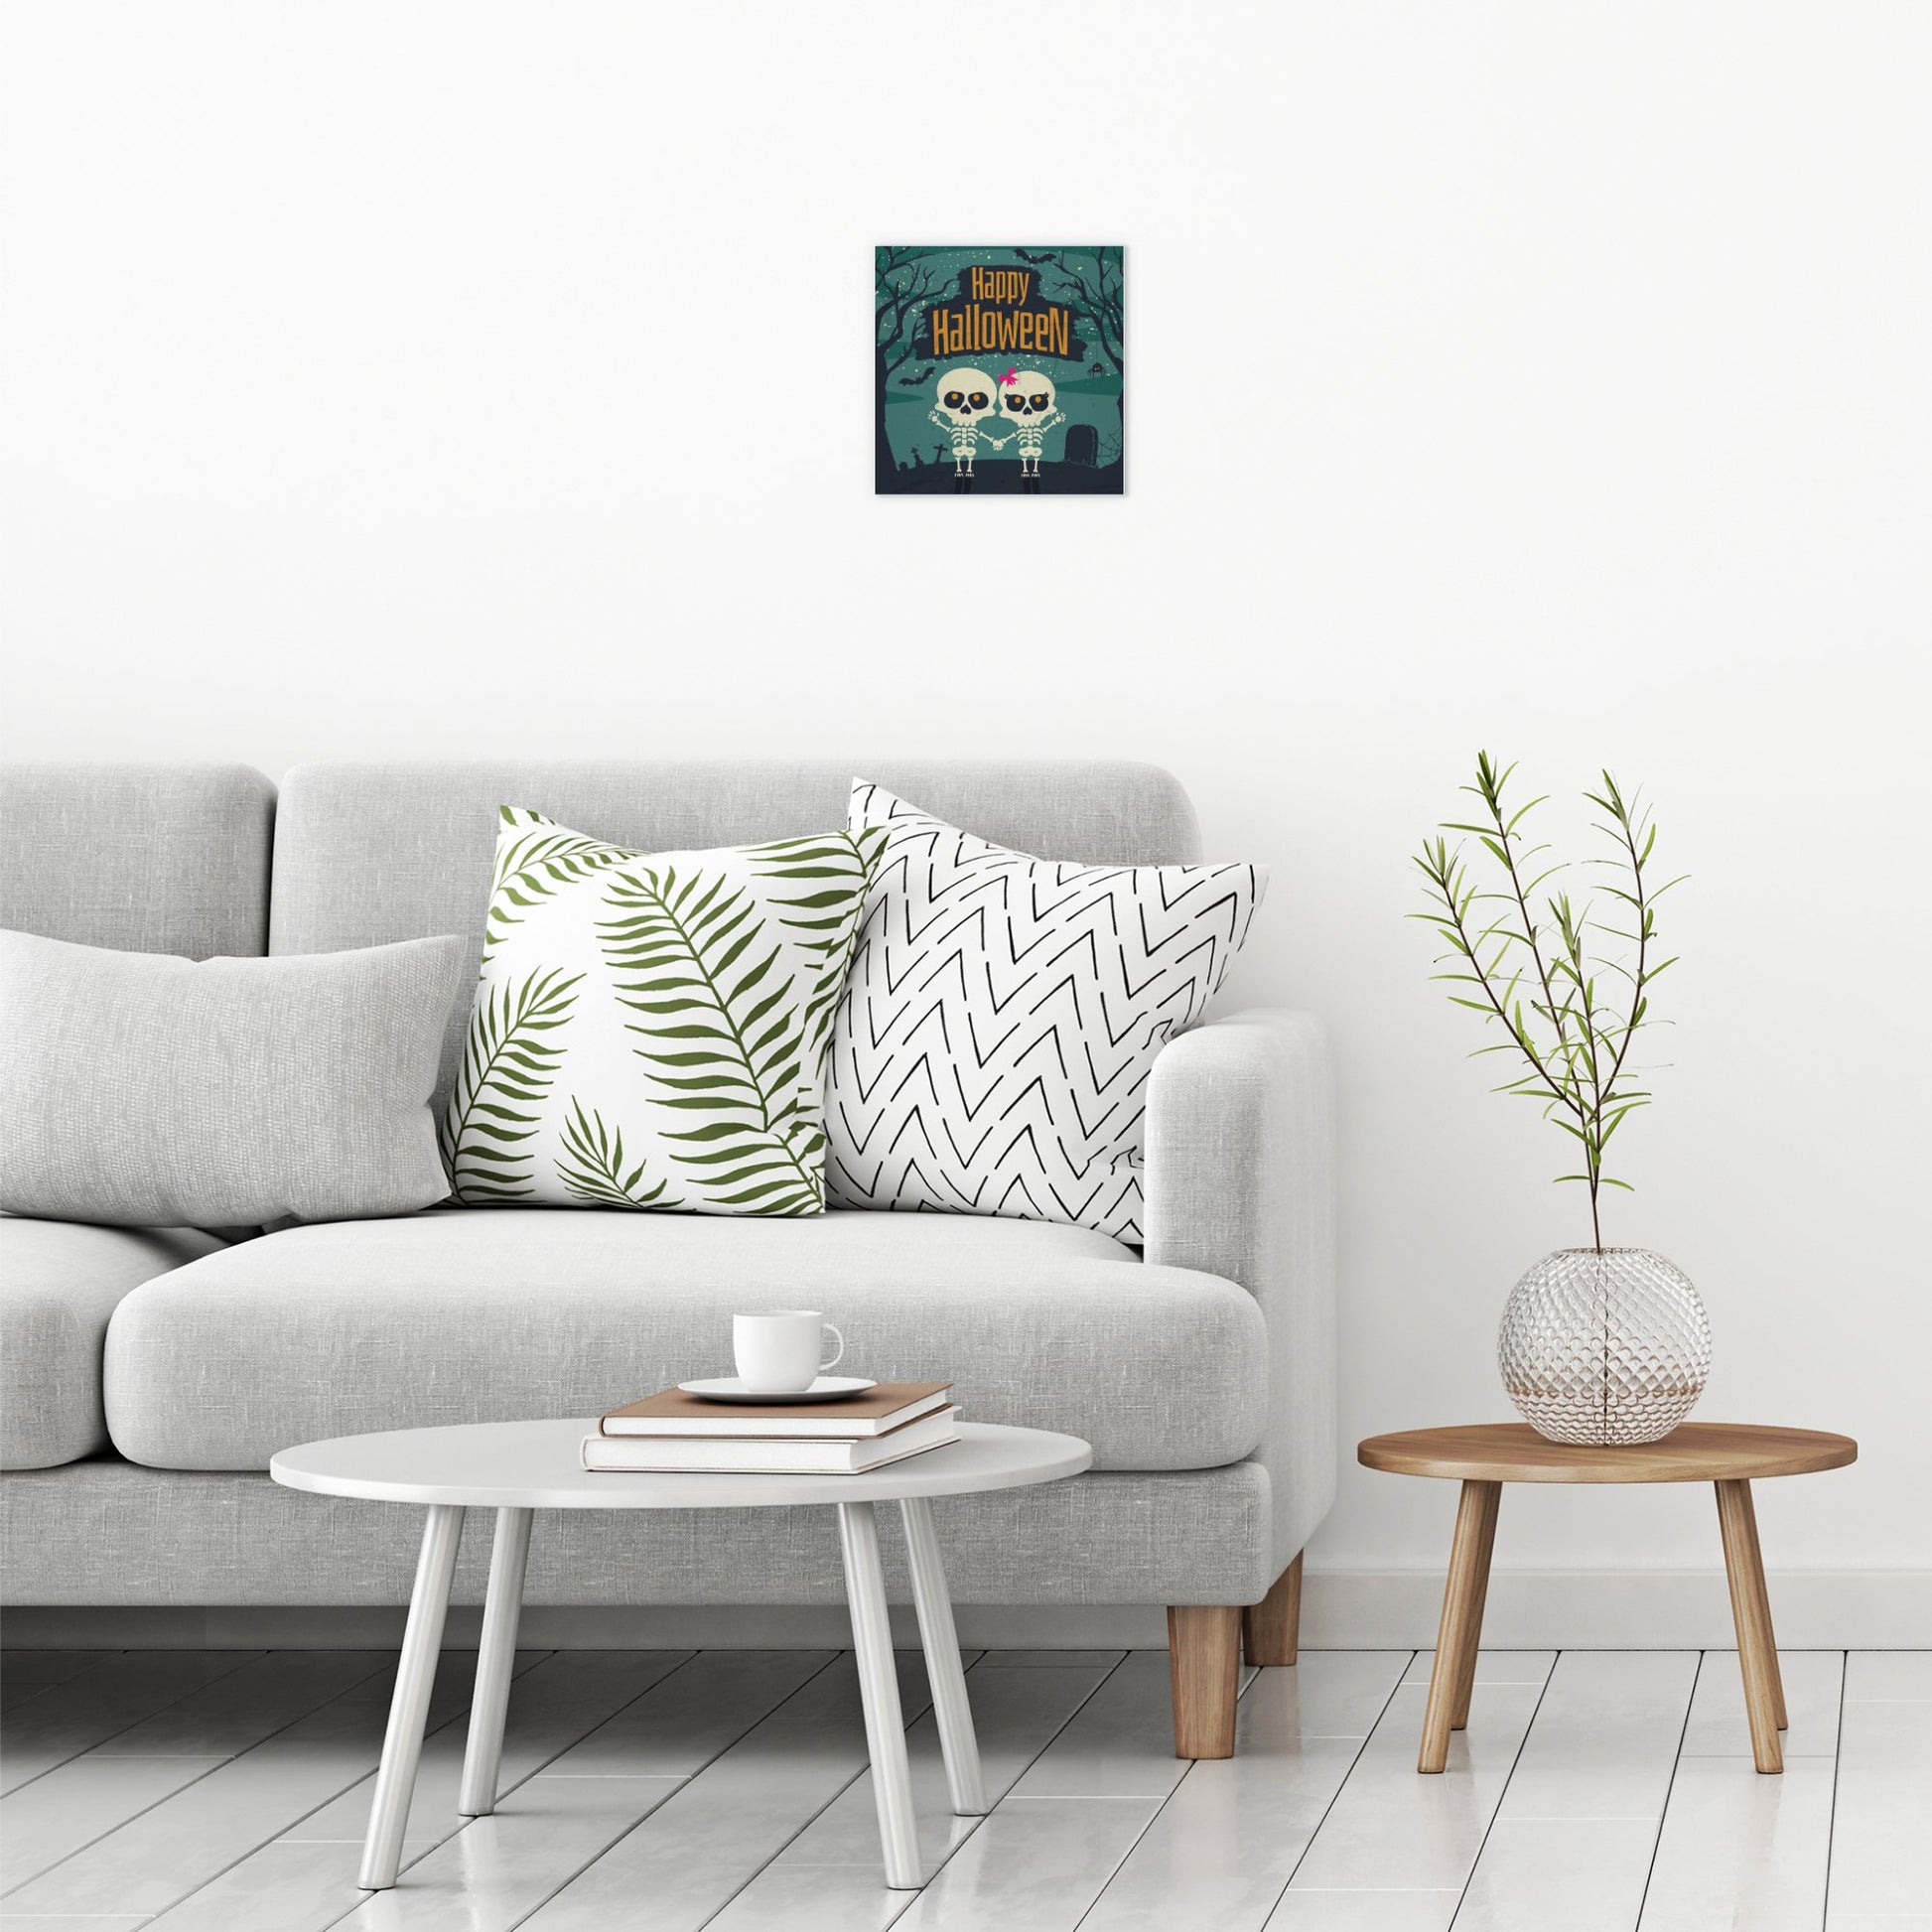 A contemporary modern room view showing a small size metal art poster display plate with printed design of a Happy Halloween Cute Skeletons